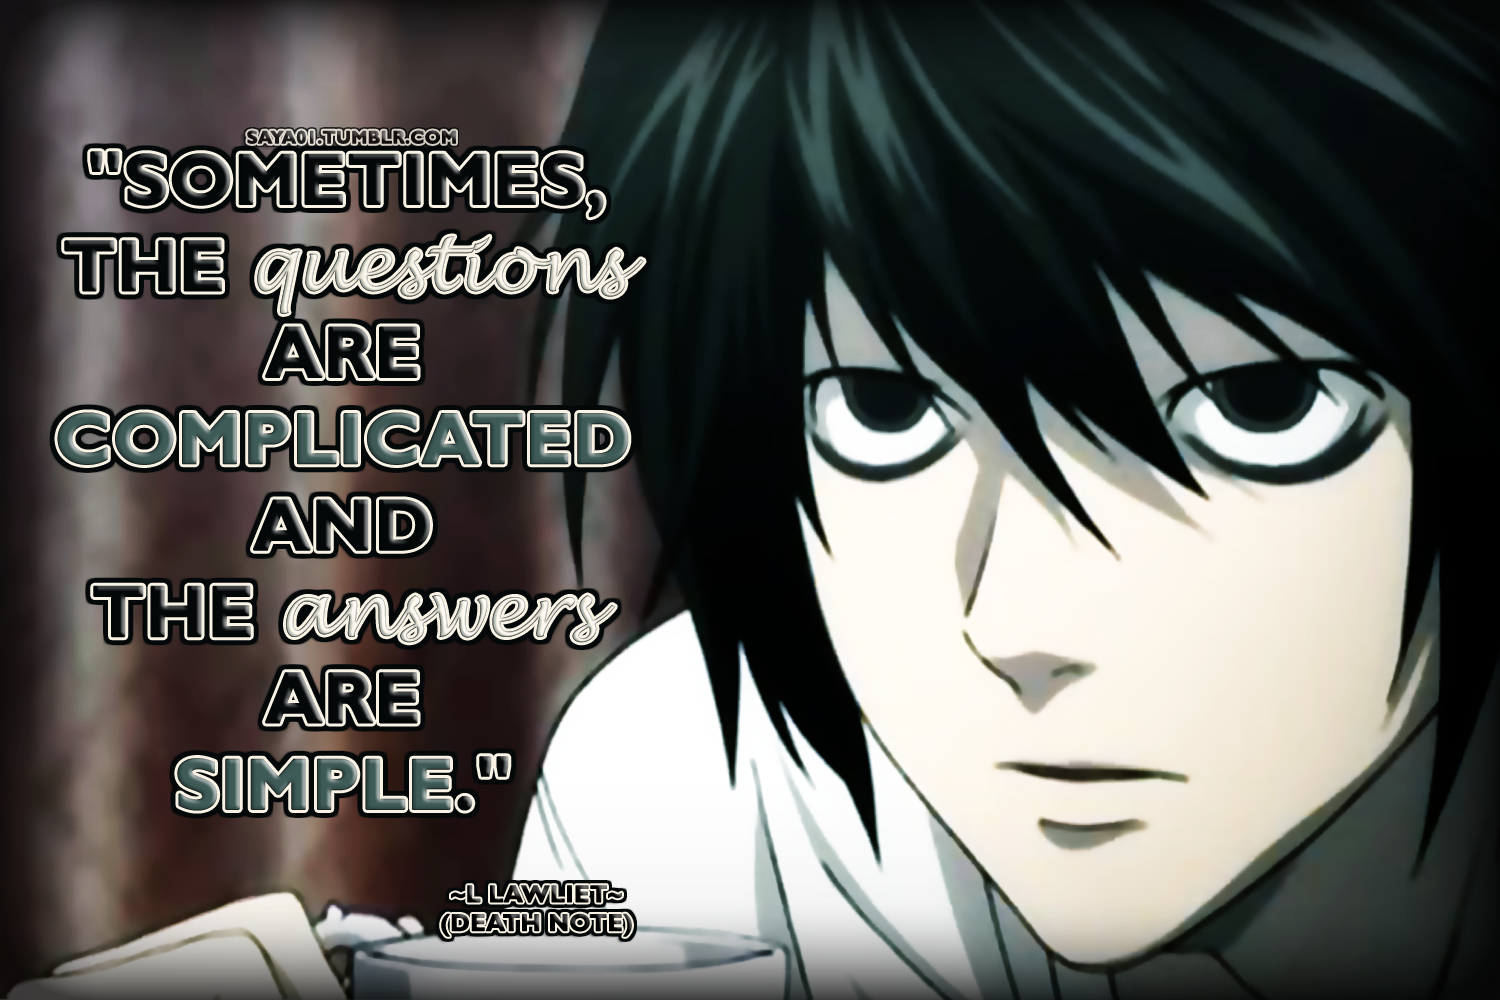 Anime Quotes About Death